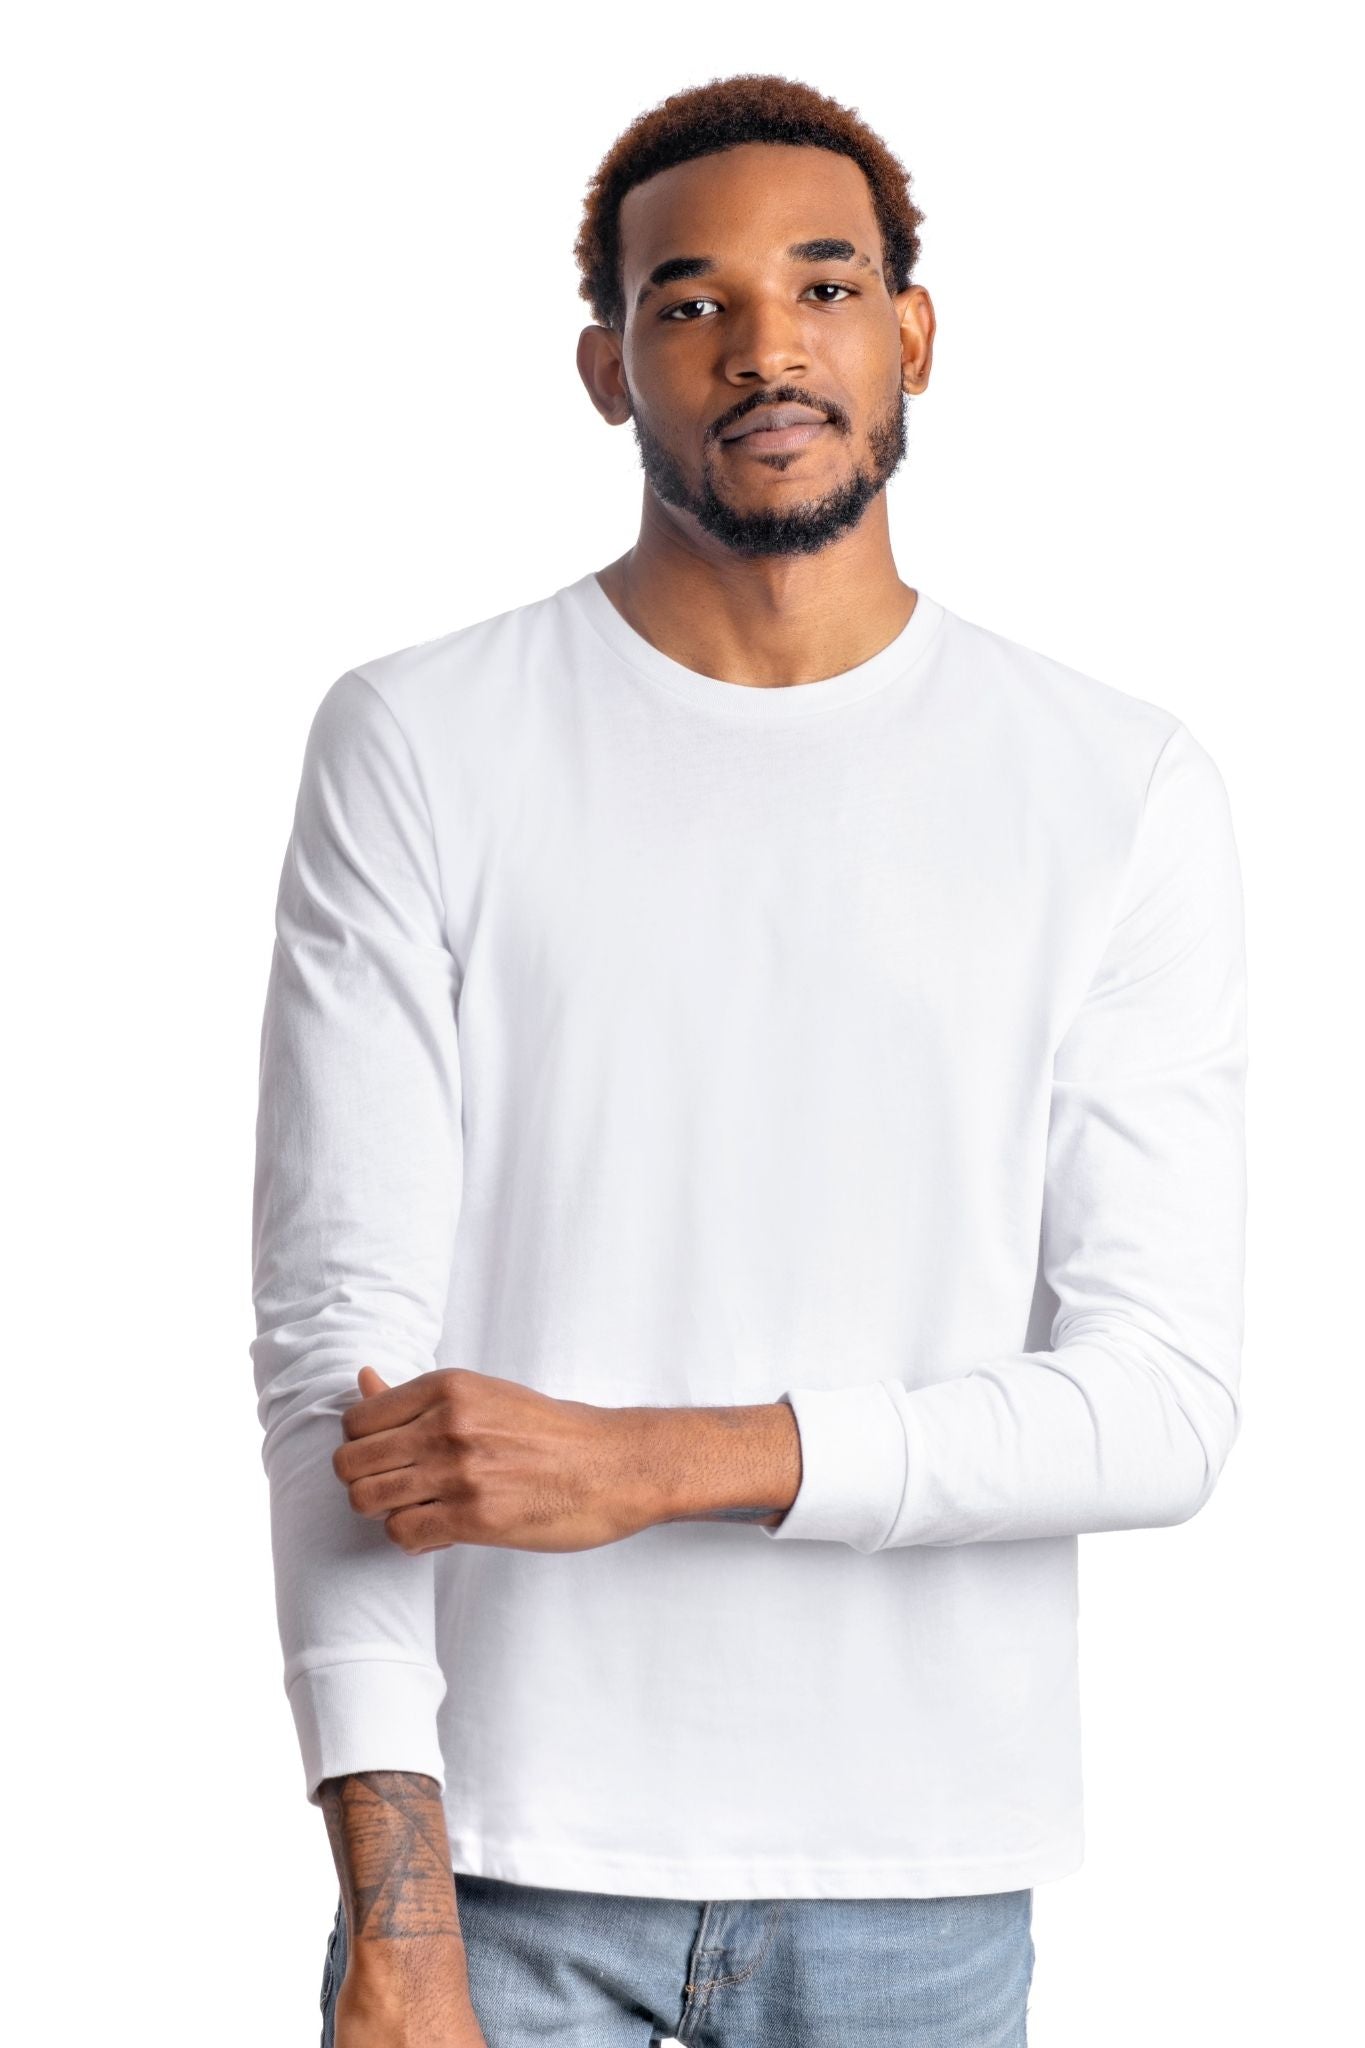 GOLD COTTON Unisex Organic Long Sleeve Tee in White